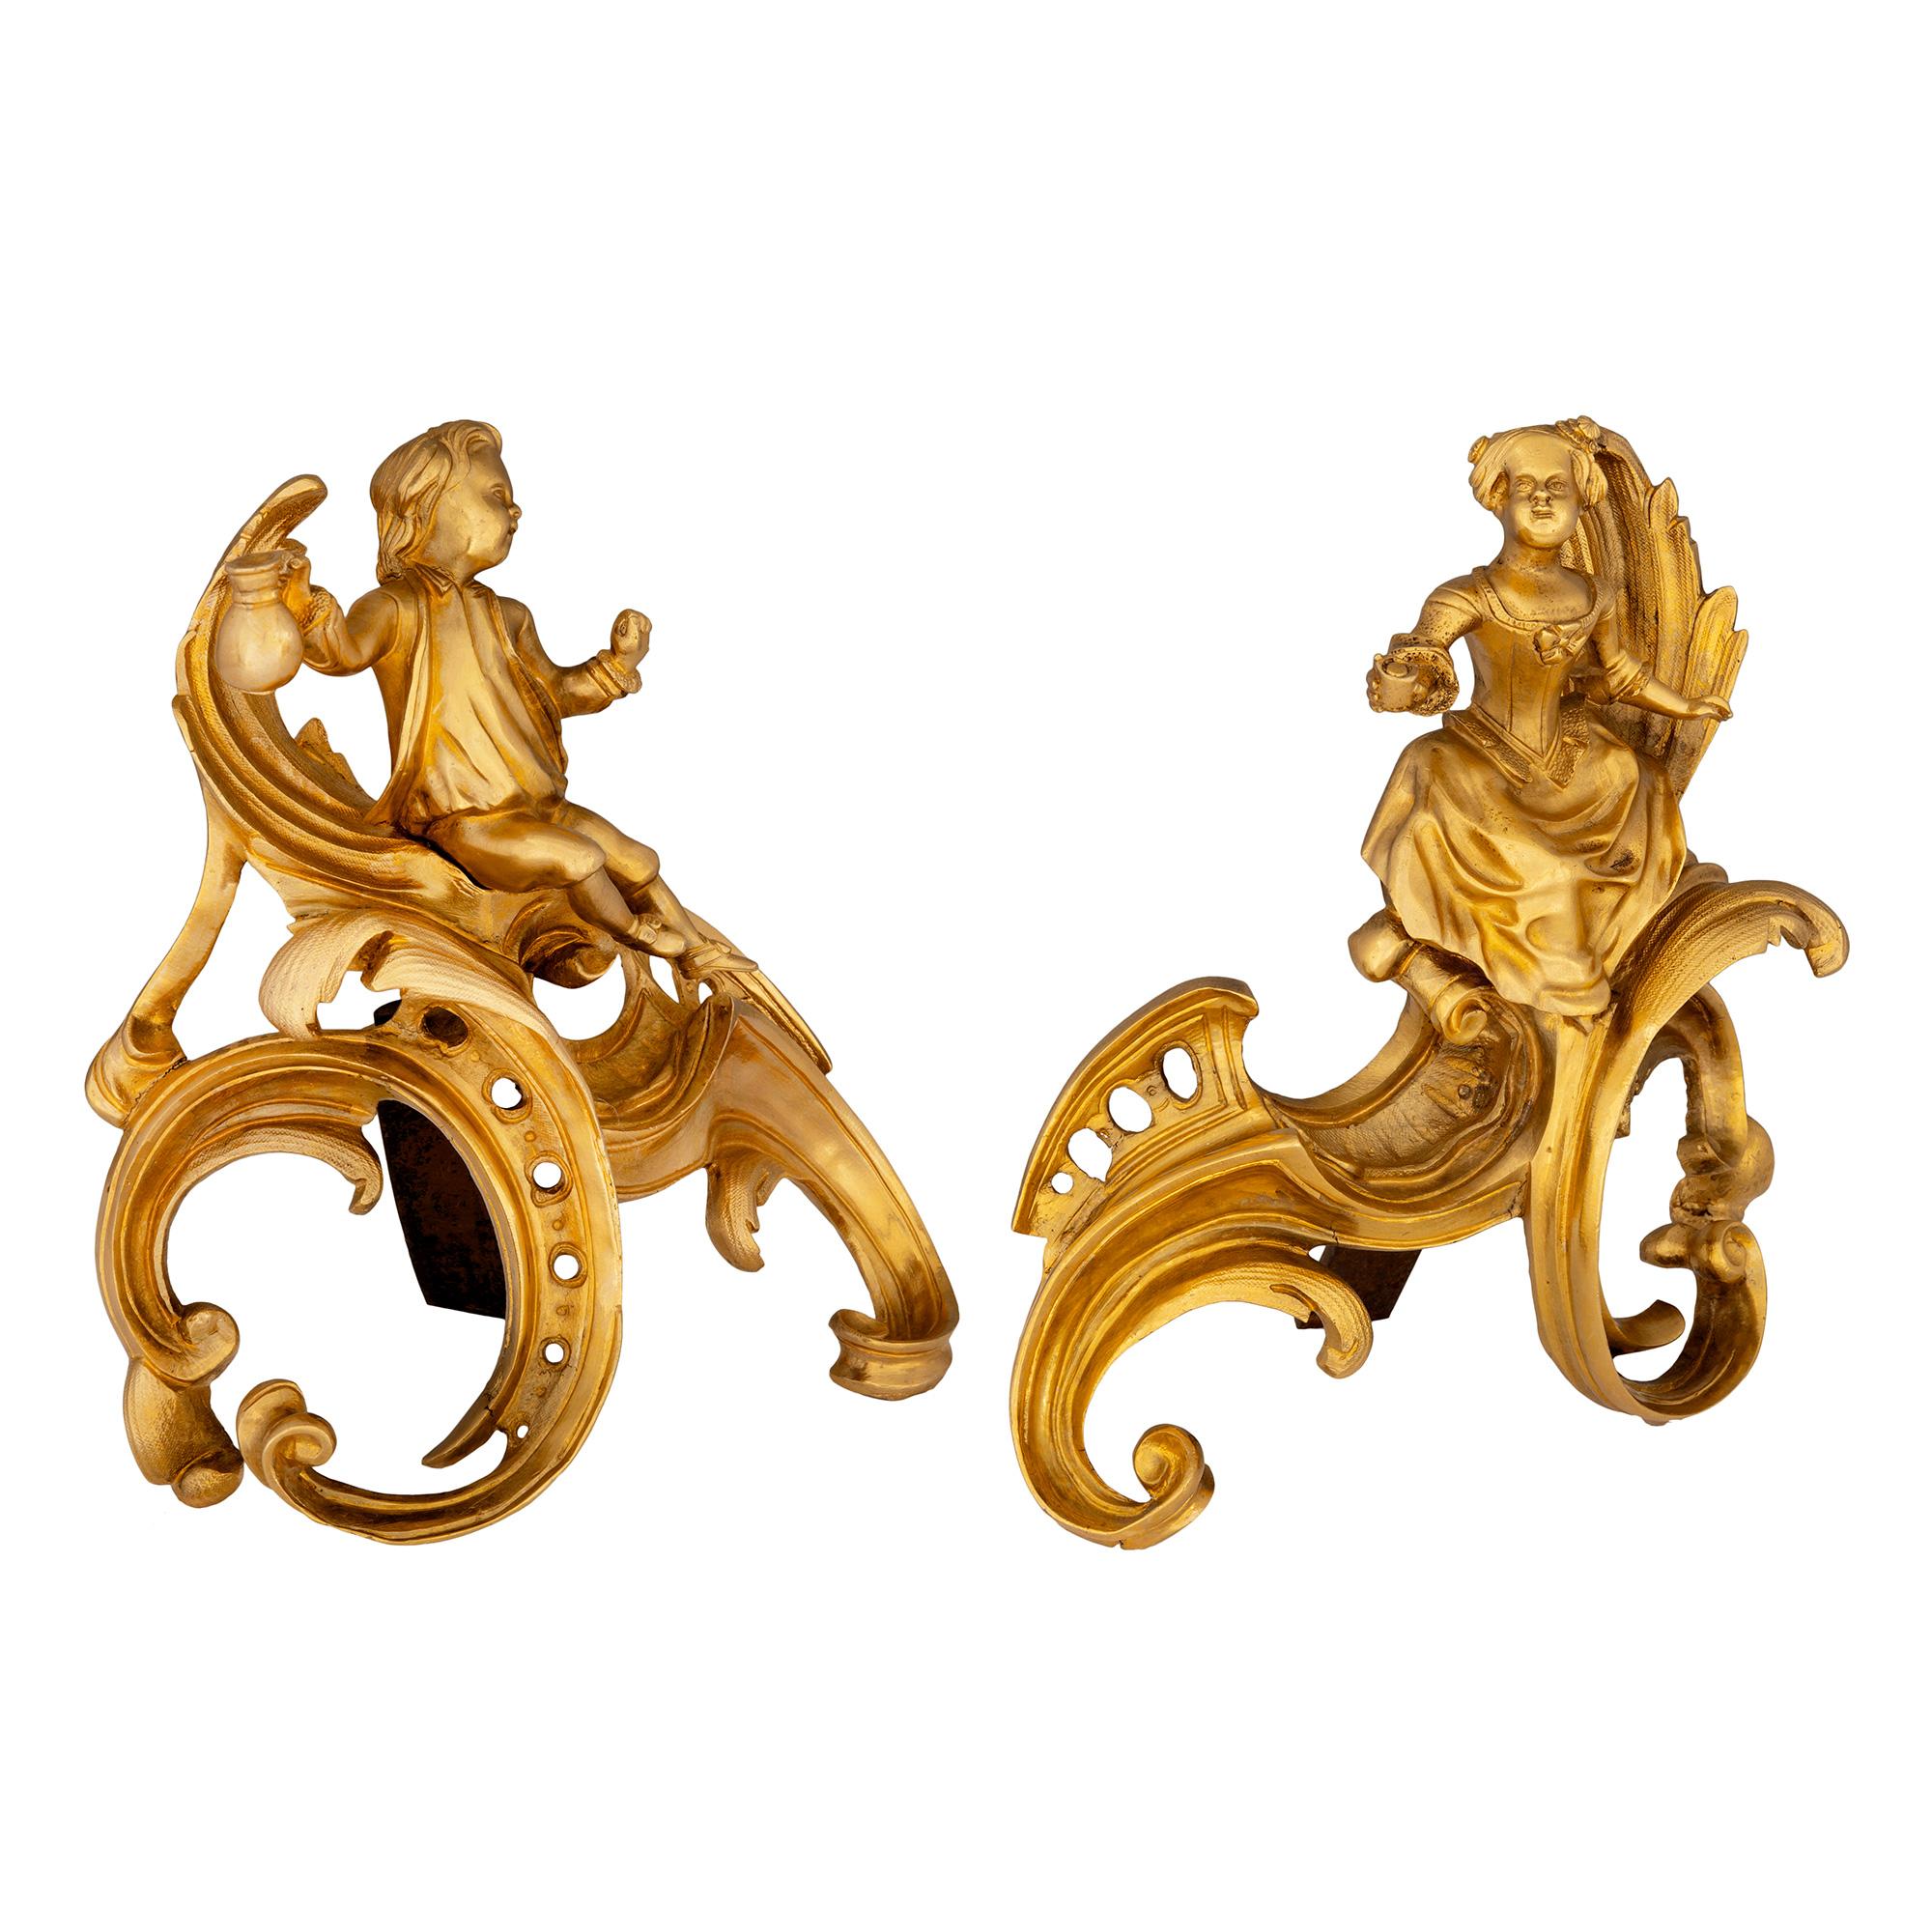 A beautiful and exceptional quality pair of French 19th century Louis XVI st. ormolu andirons. Each fire-gilded andiron is raised by most decorative fanciful scrolled supports with pierced and mottled designs. Above are two charming personages